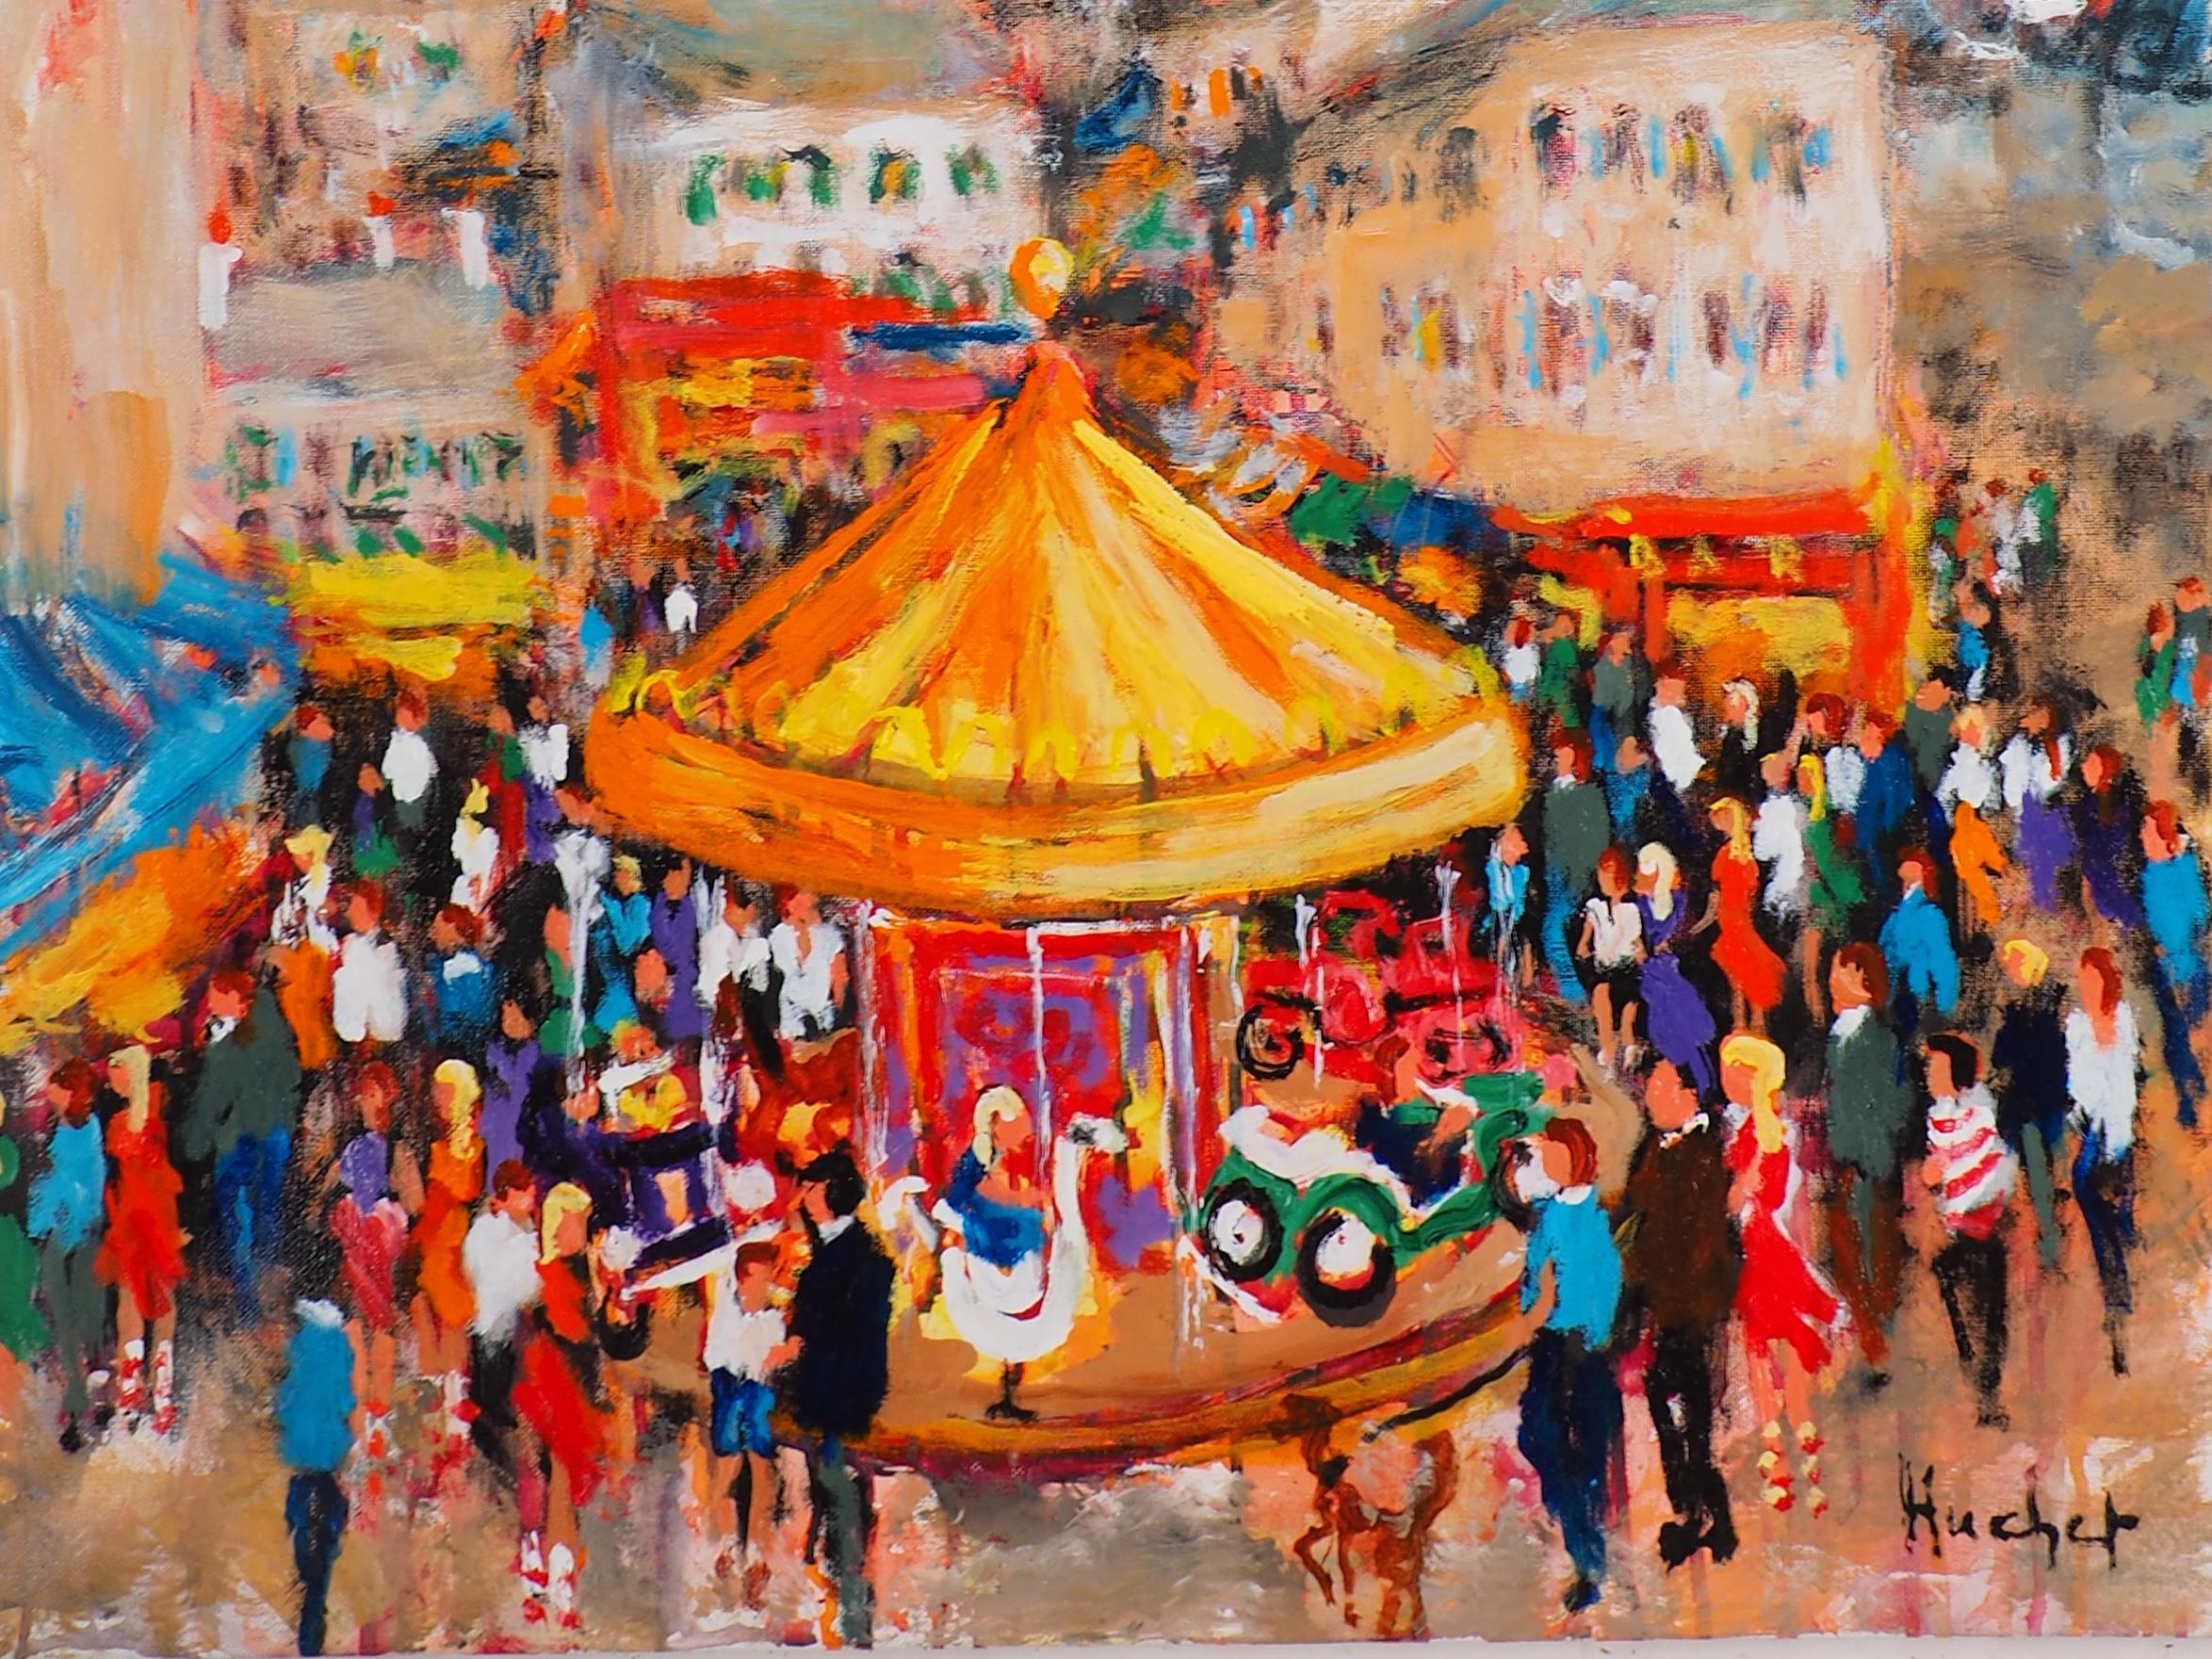 Paris : Fun Fair in Montmartre (Sacre Coeur) - Tall Oil on Canvas - Signed - Post-Impressionist Painting by Urbain Huchet